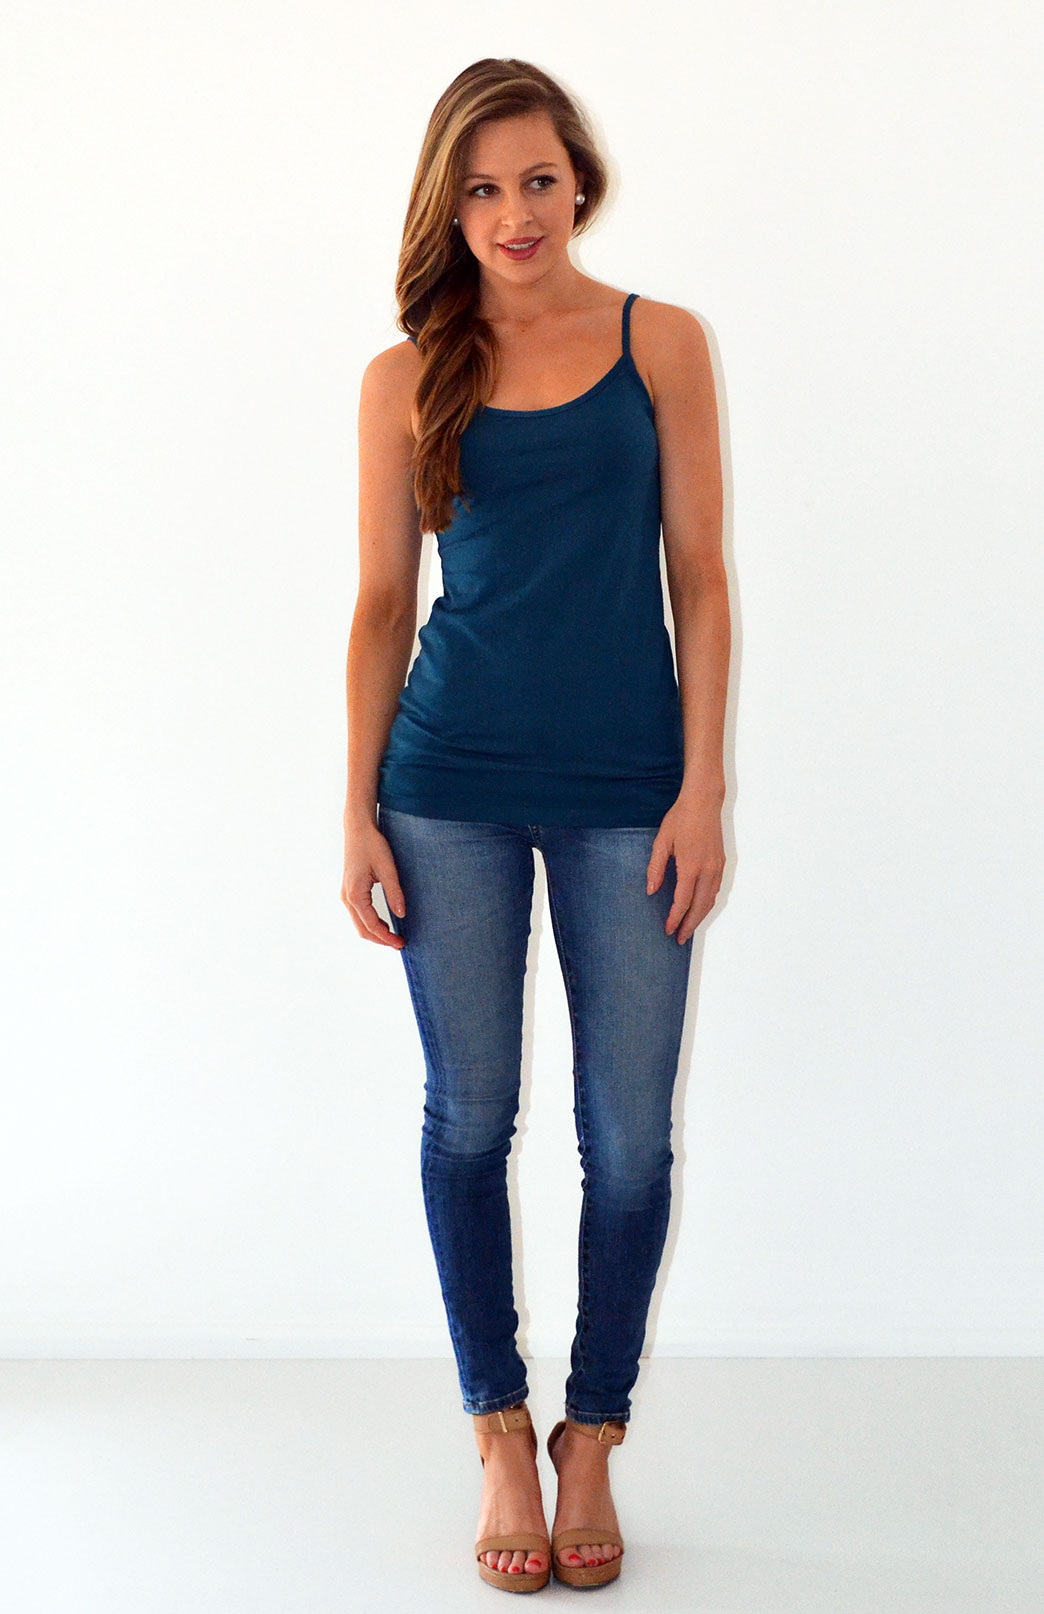 Camisole Top | Women's Wool Storm Teal Camisole Layering Thermal Tank ...